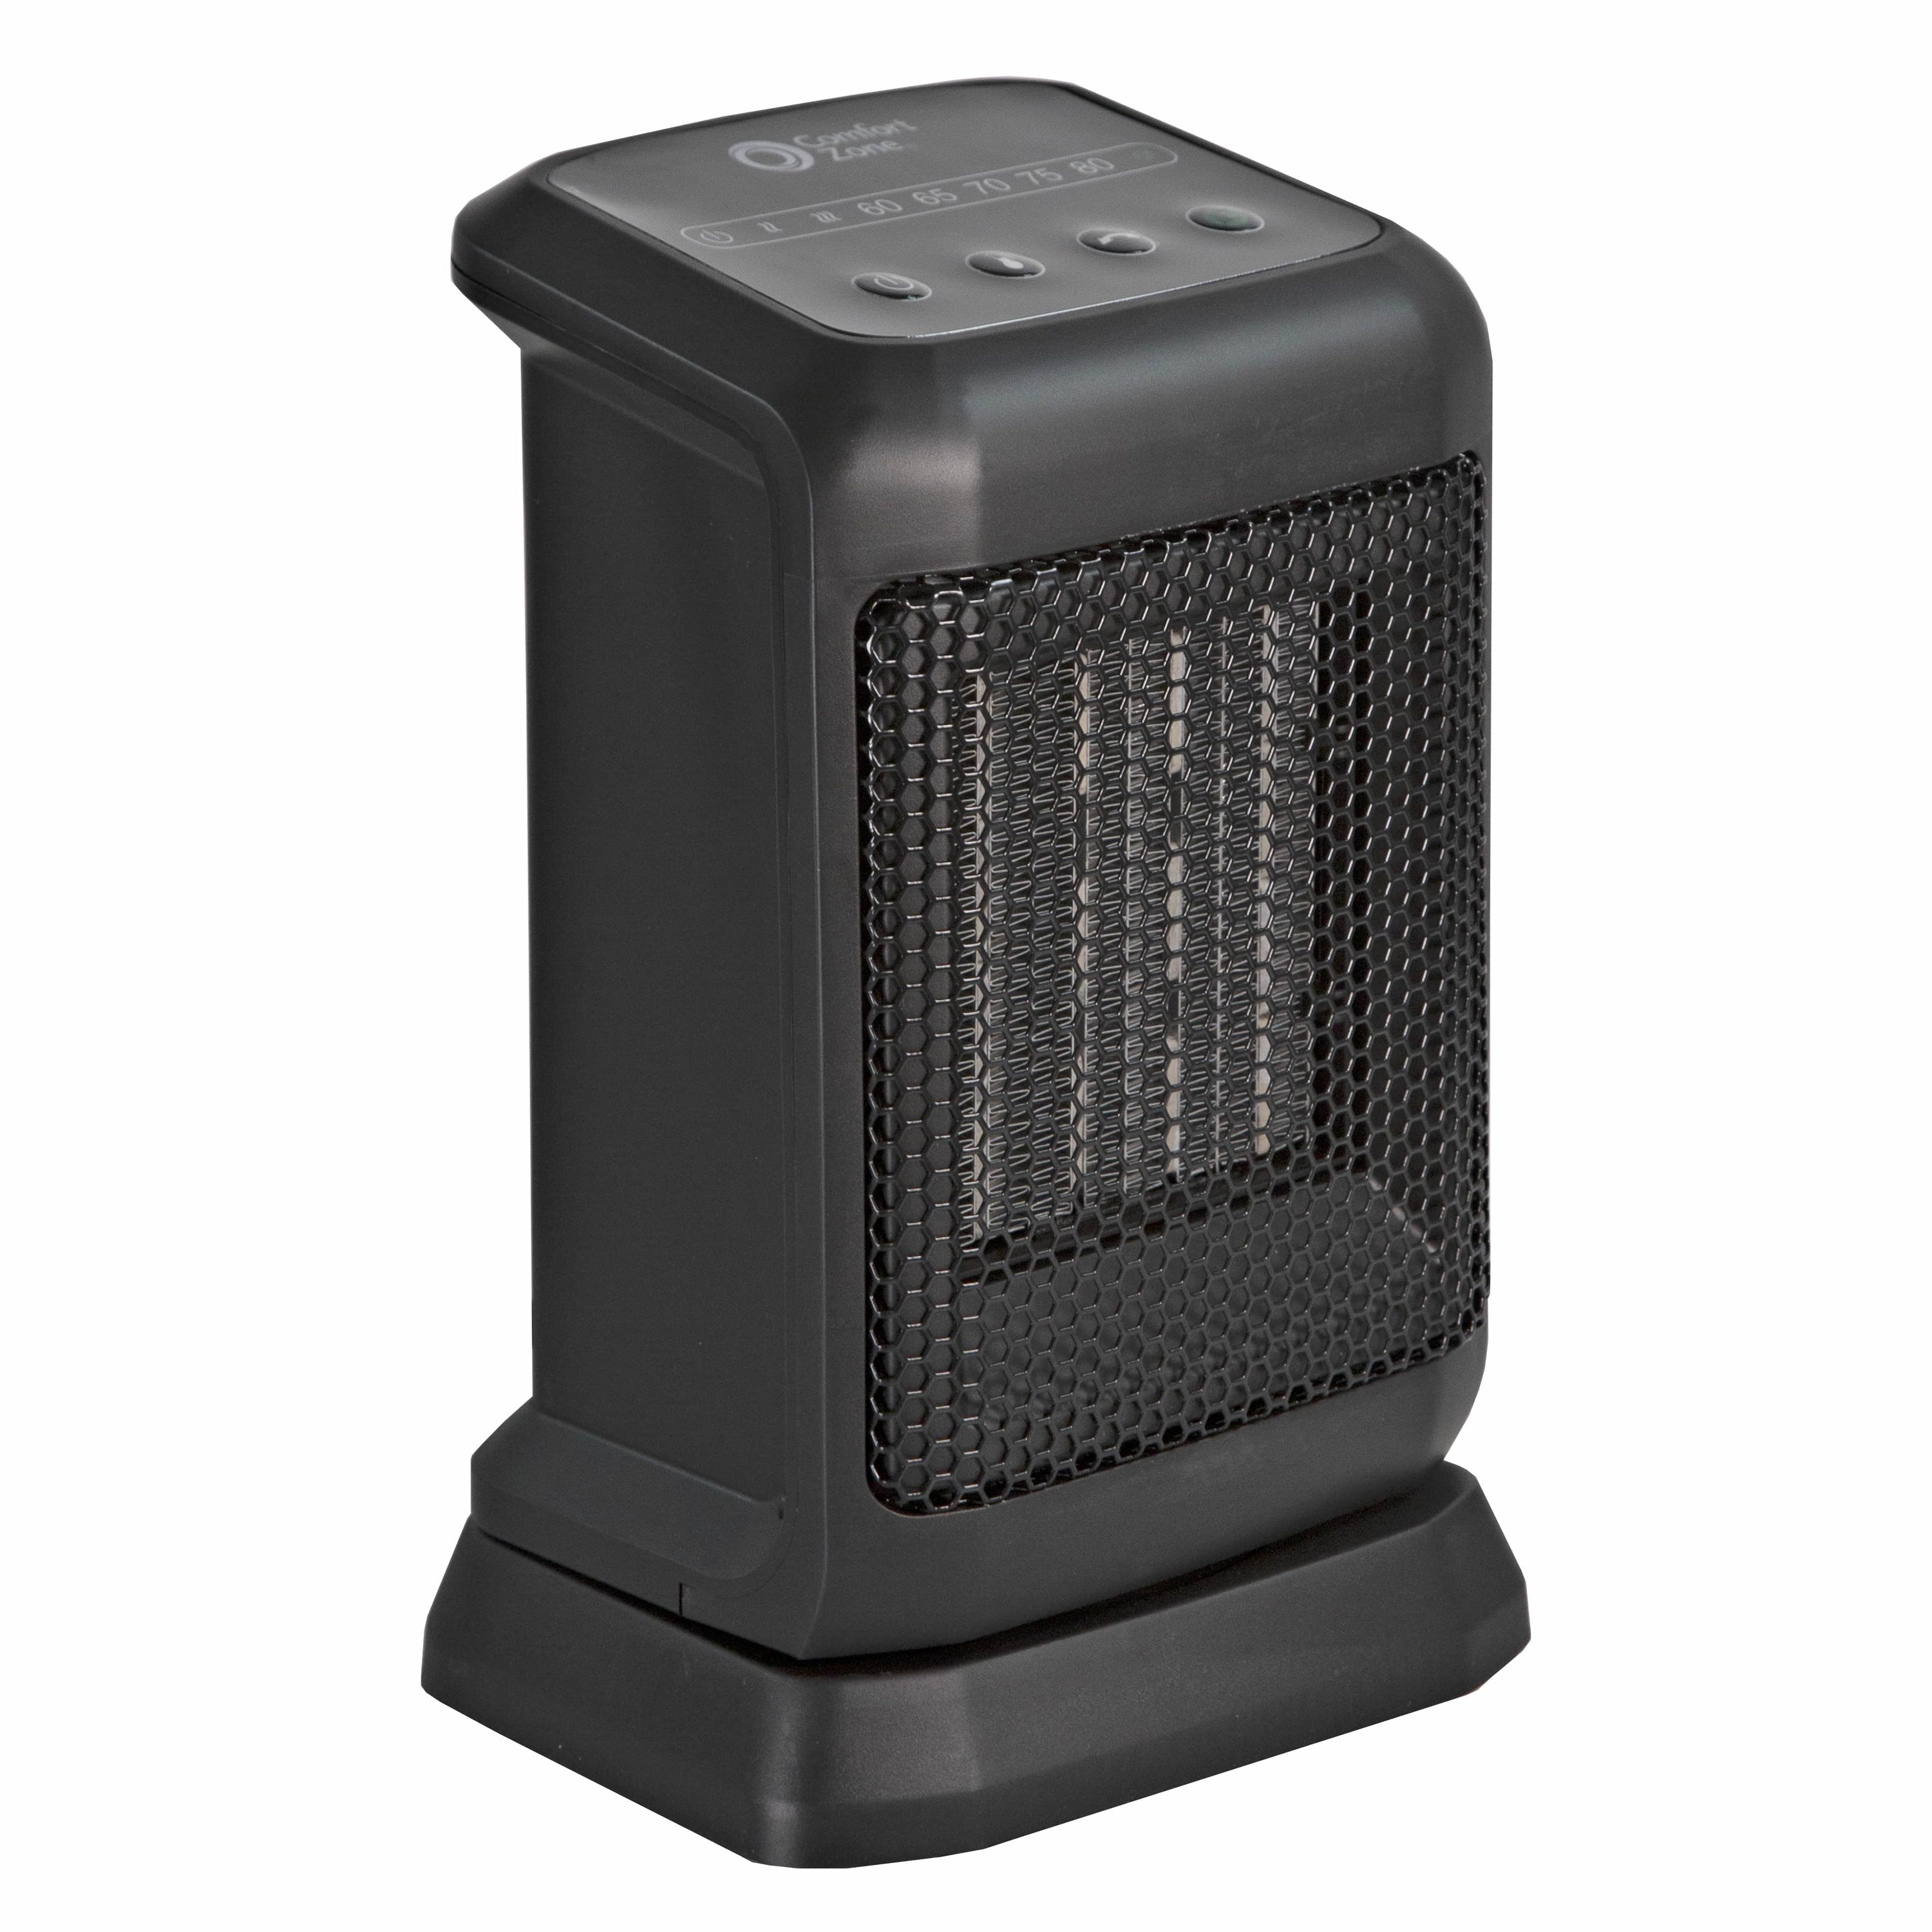  BLACK+DECKER Portable Space Heater, Room Space Heater with  Carry Handle for Easy Transport : Home & Kitchen